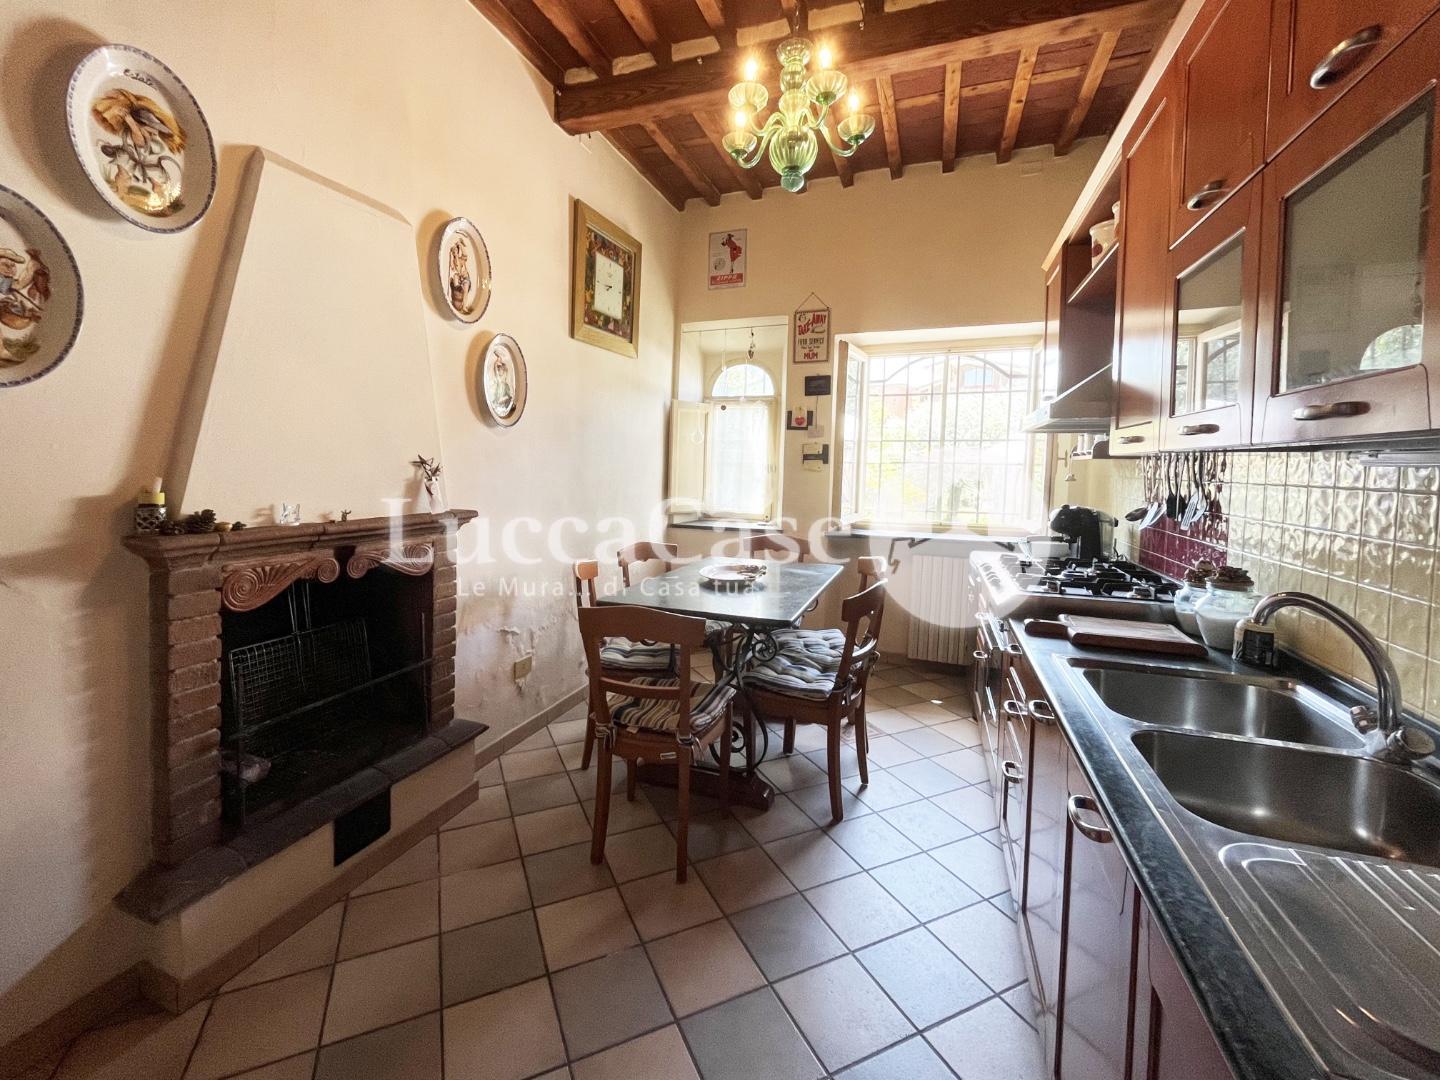 Townhouses for sale in Lucca